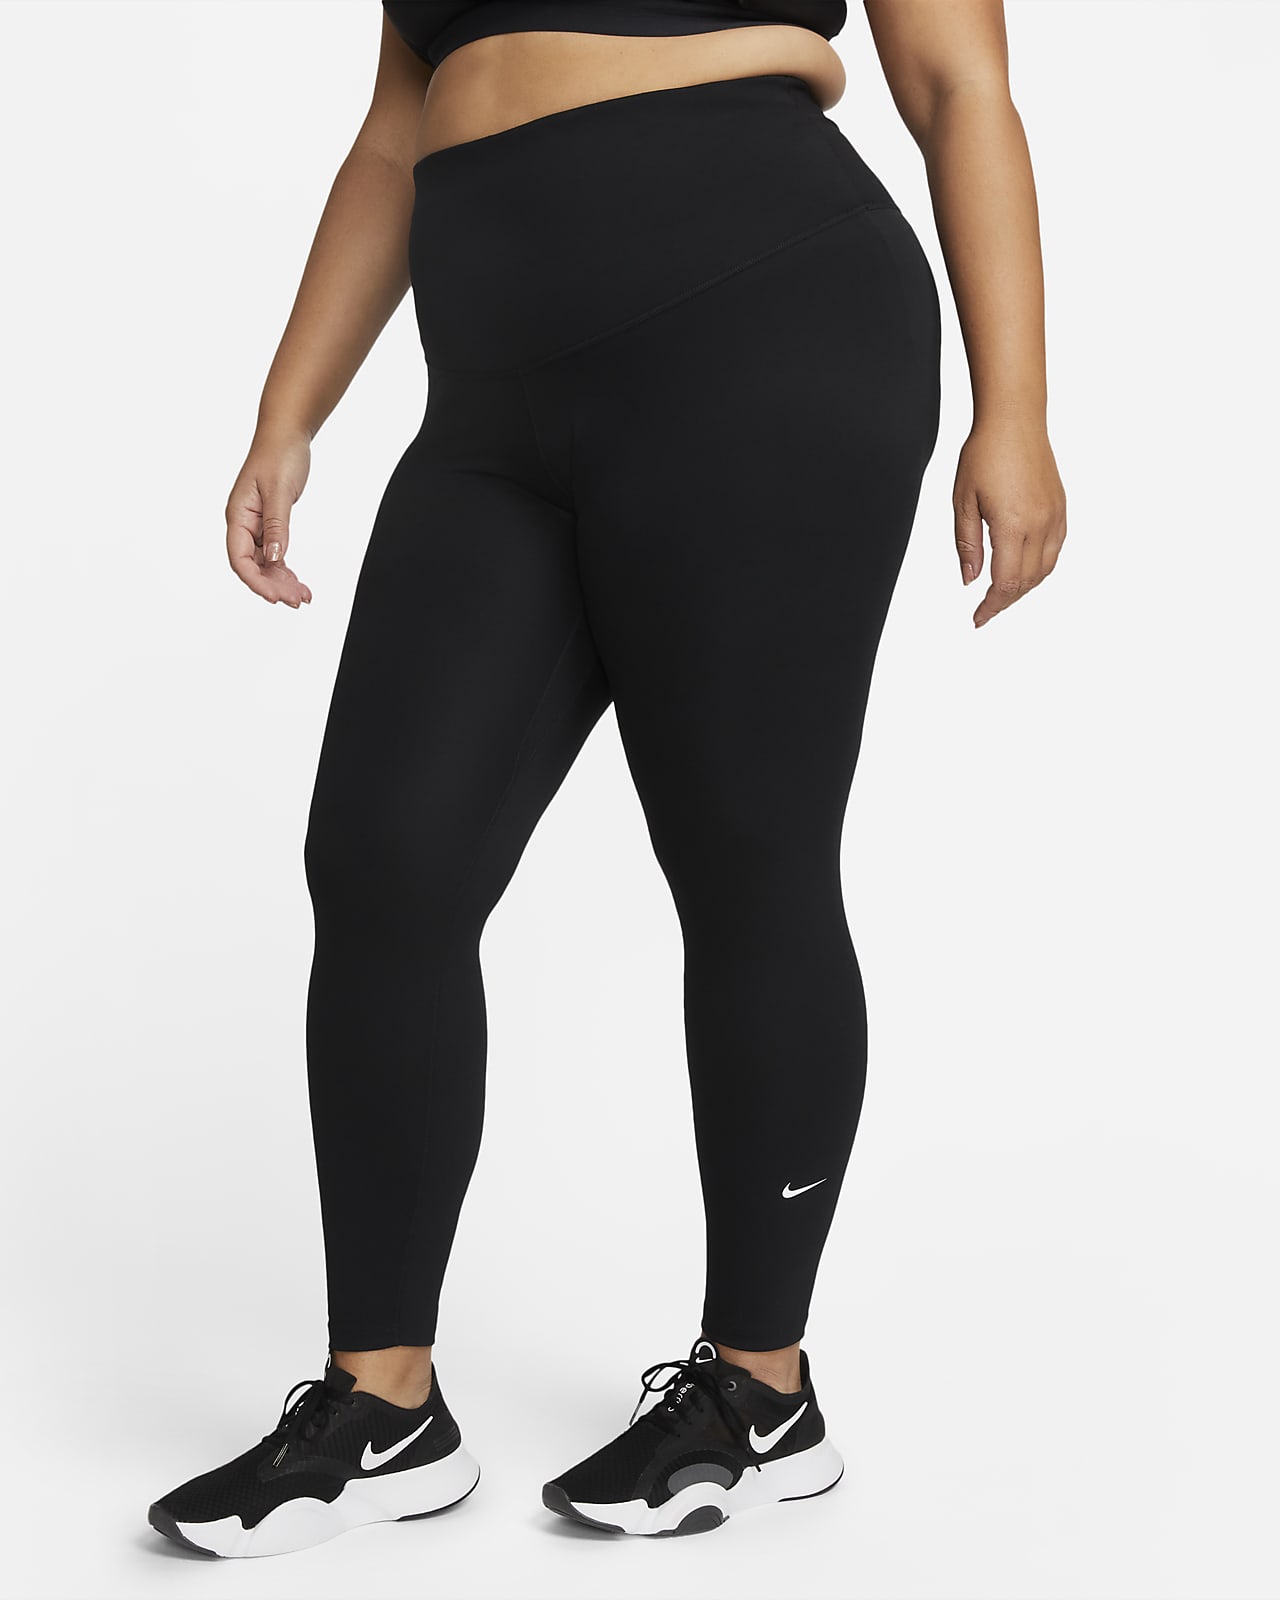 Legging taille haute Nike One pour femme (grande taille)